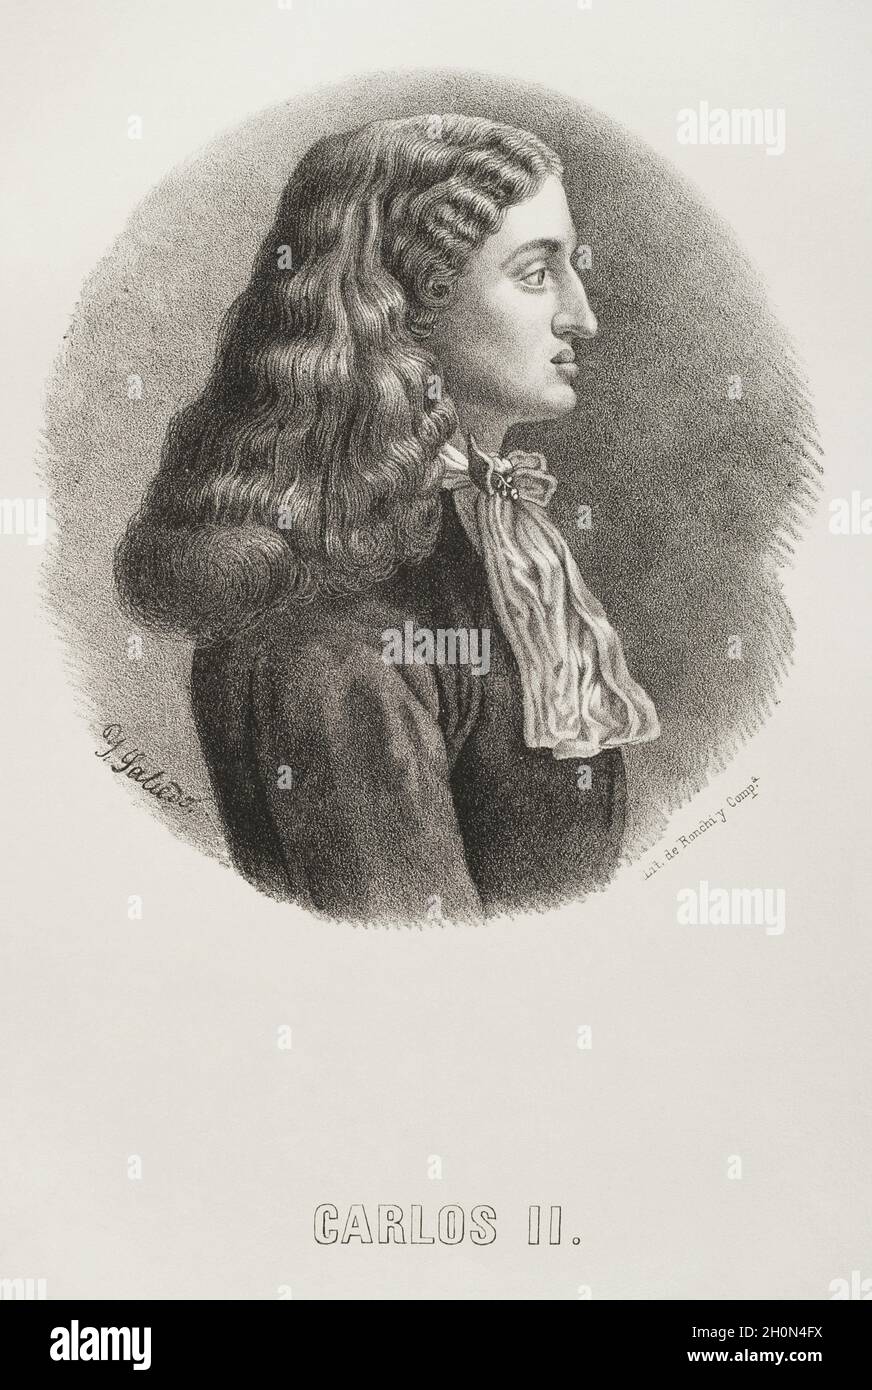 Charles II, the Bewitched (1661-1700). King of Spain. Portrait. Illustration by Salcedo. Lithography. Cronica General de España. Historia Ilustrada y Stock Photo